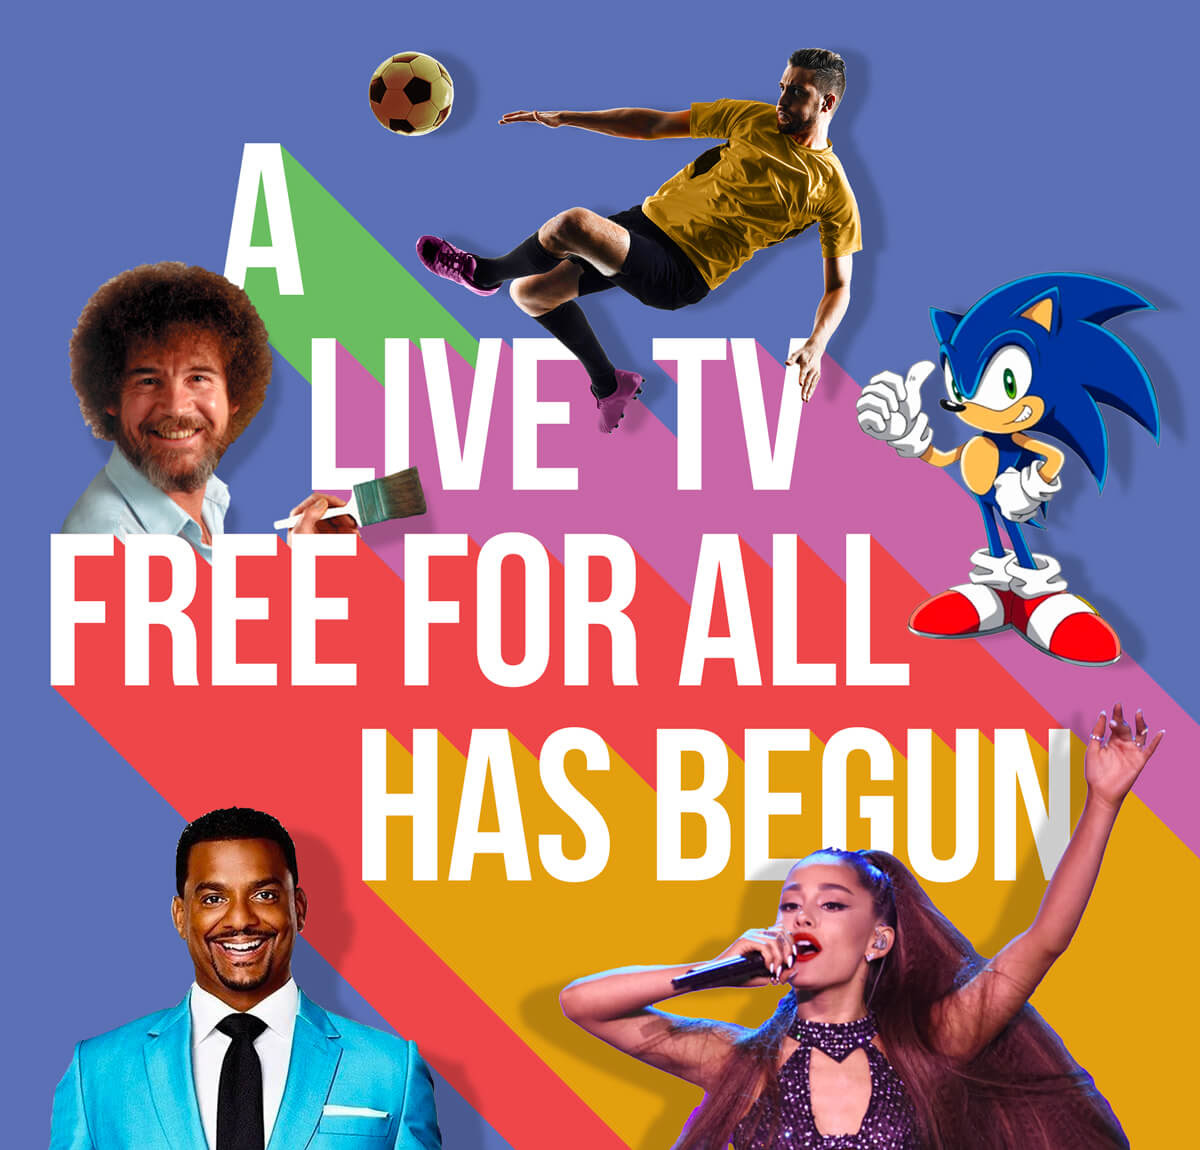 A Live TV free for all has begun.